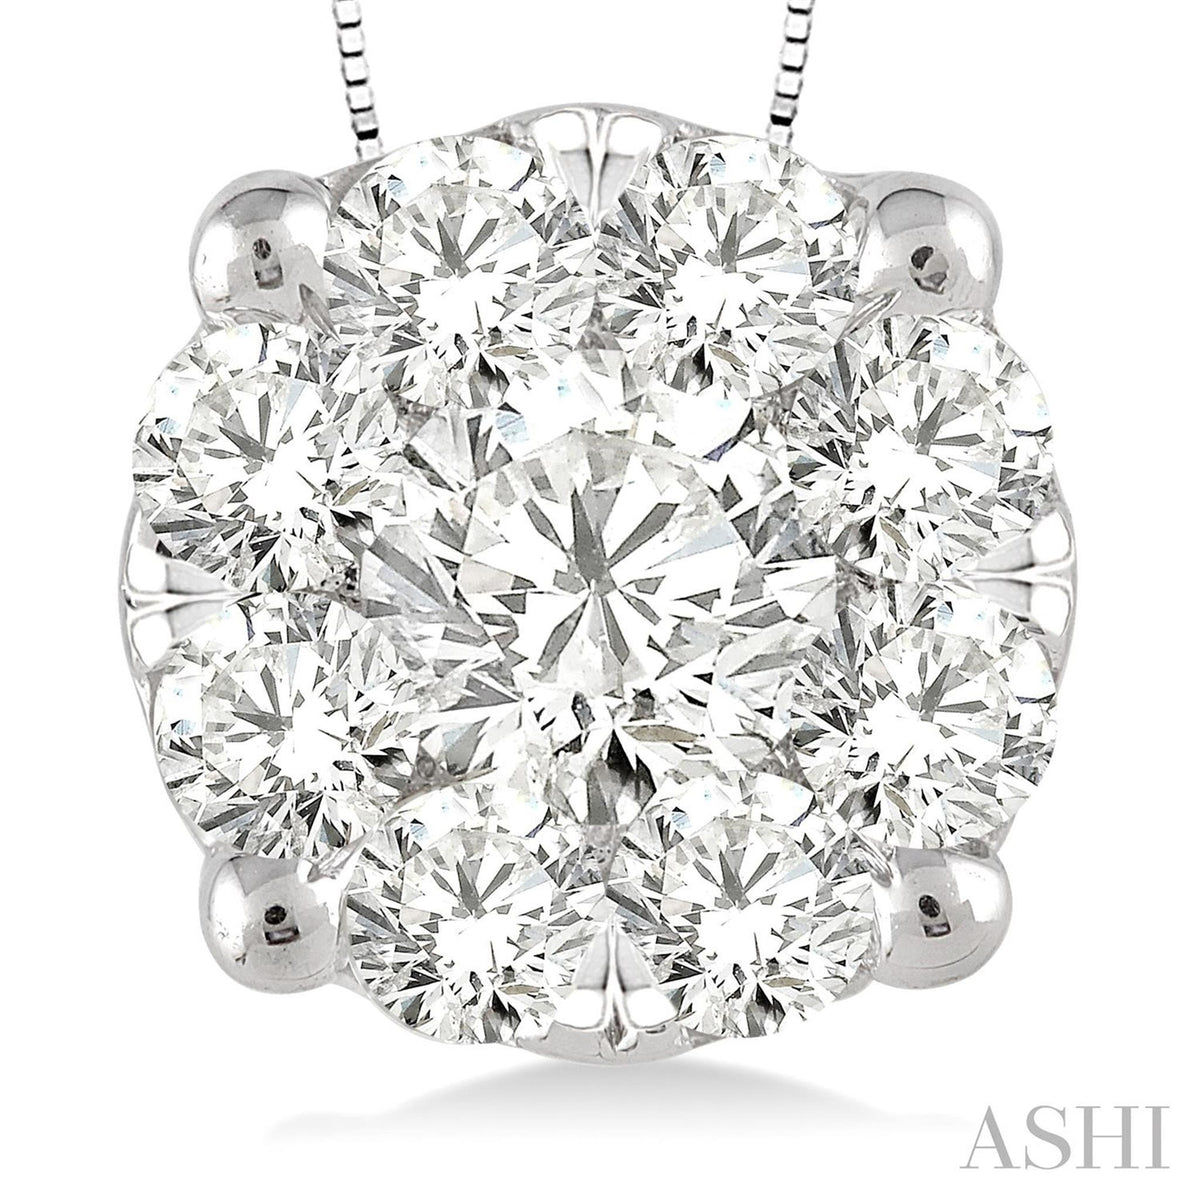 Lovebright 14Kt White Gold Pendant With .50cttw Natural Diamonds